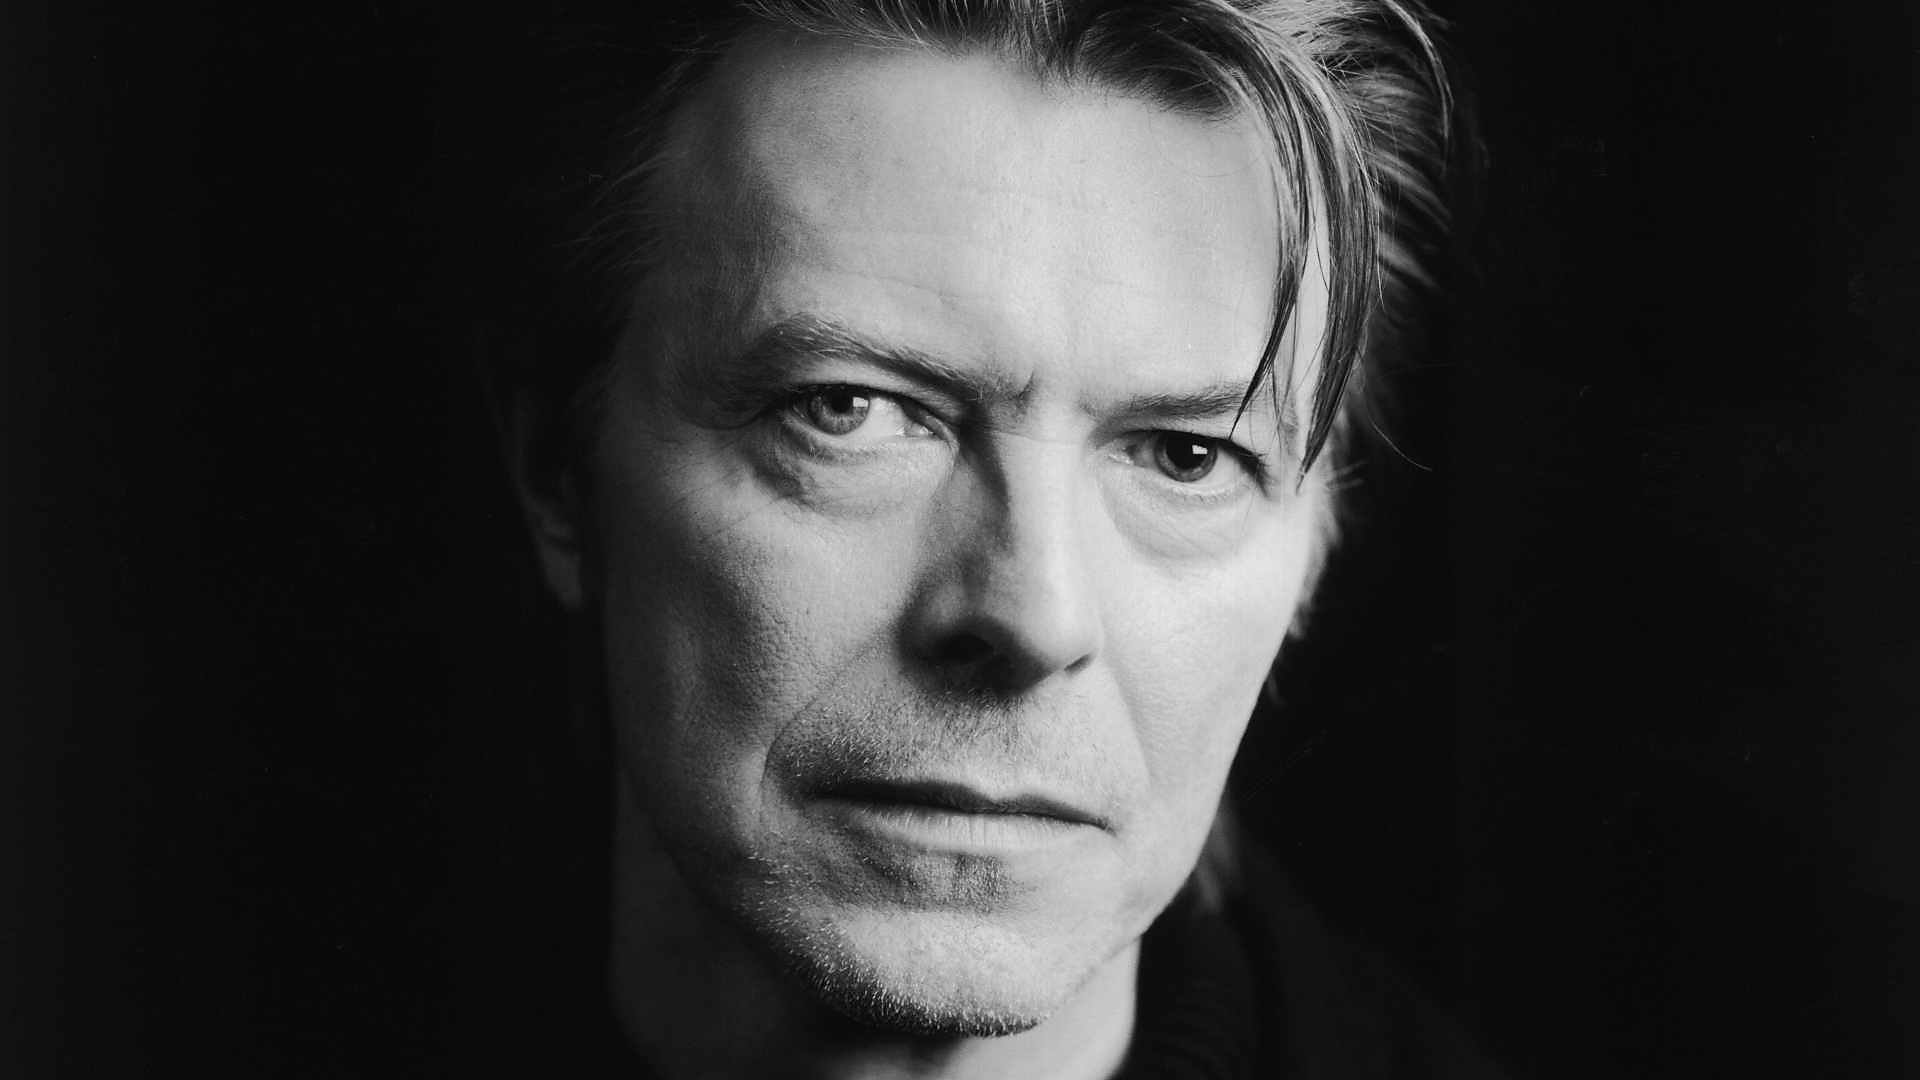 David Bowie: Ten things we've learned since his death - BBC News